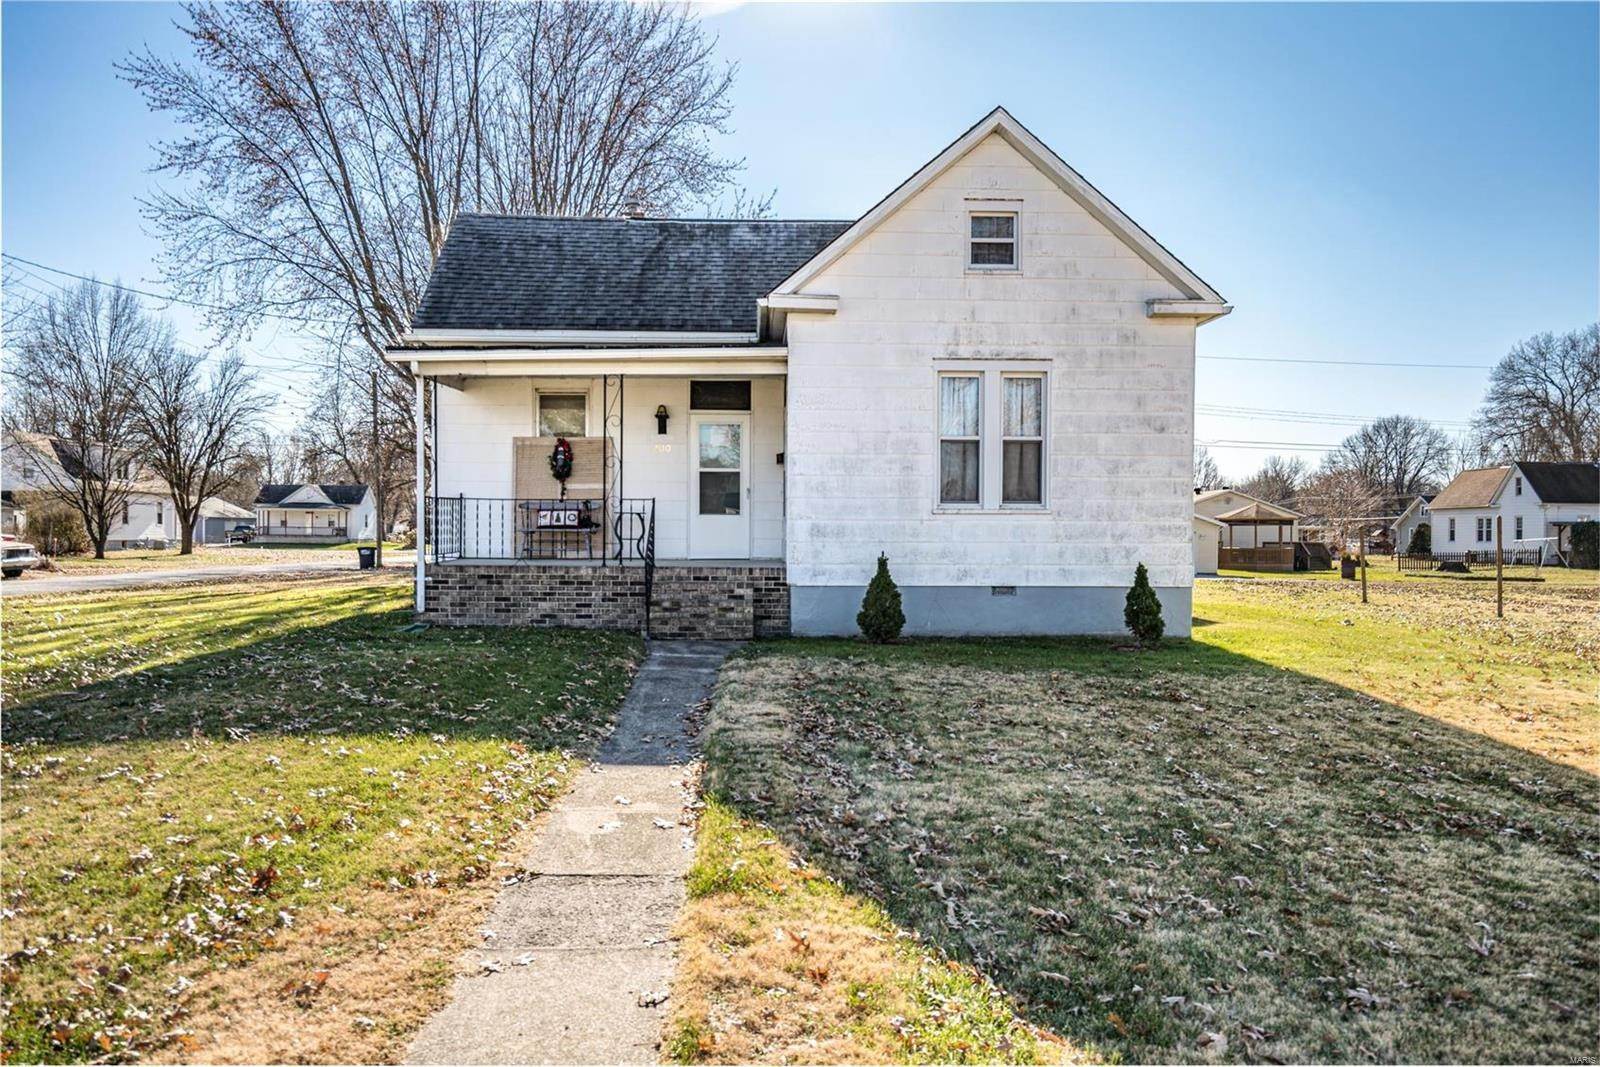 Property for Sale at 200 W 7th North Street Mount Olive, Illinois 62069 United States